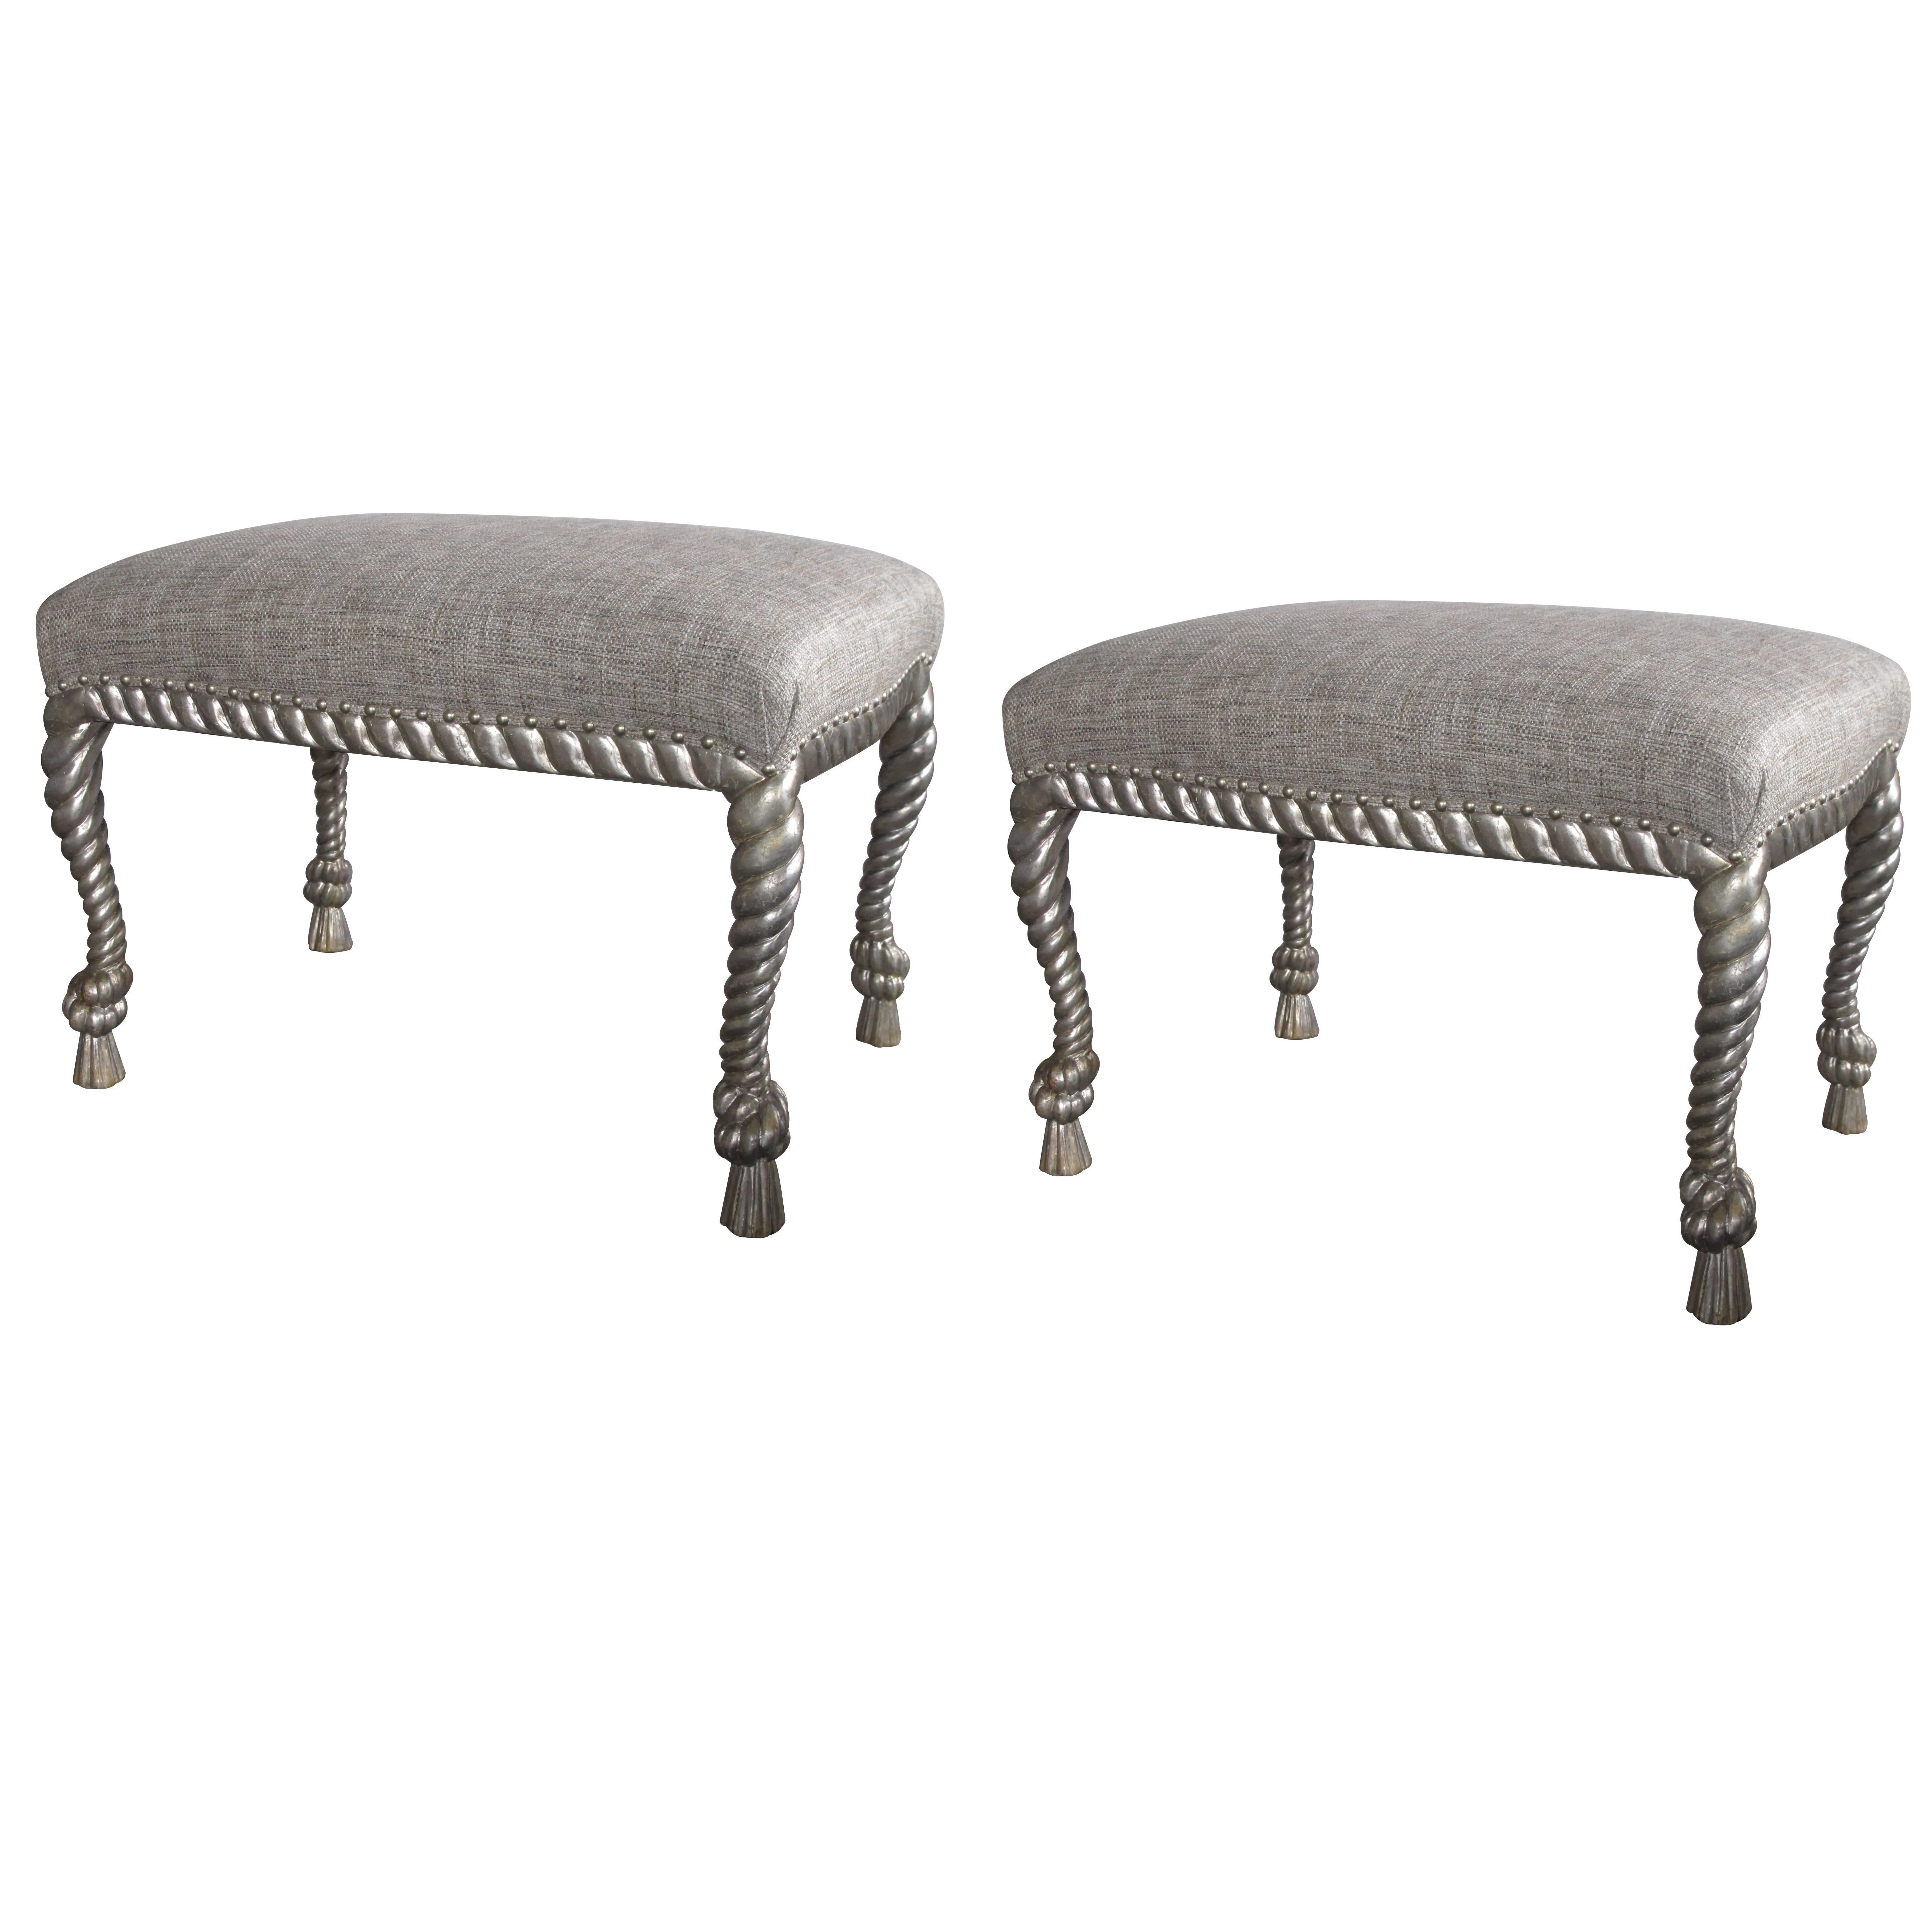 Stylish Pair of American Dorothy Draper Style Silver Twisted Gilt Rope Stools